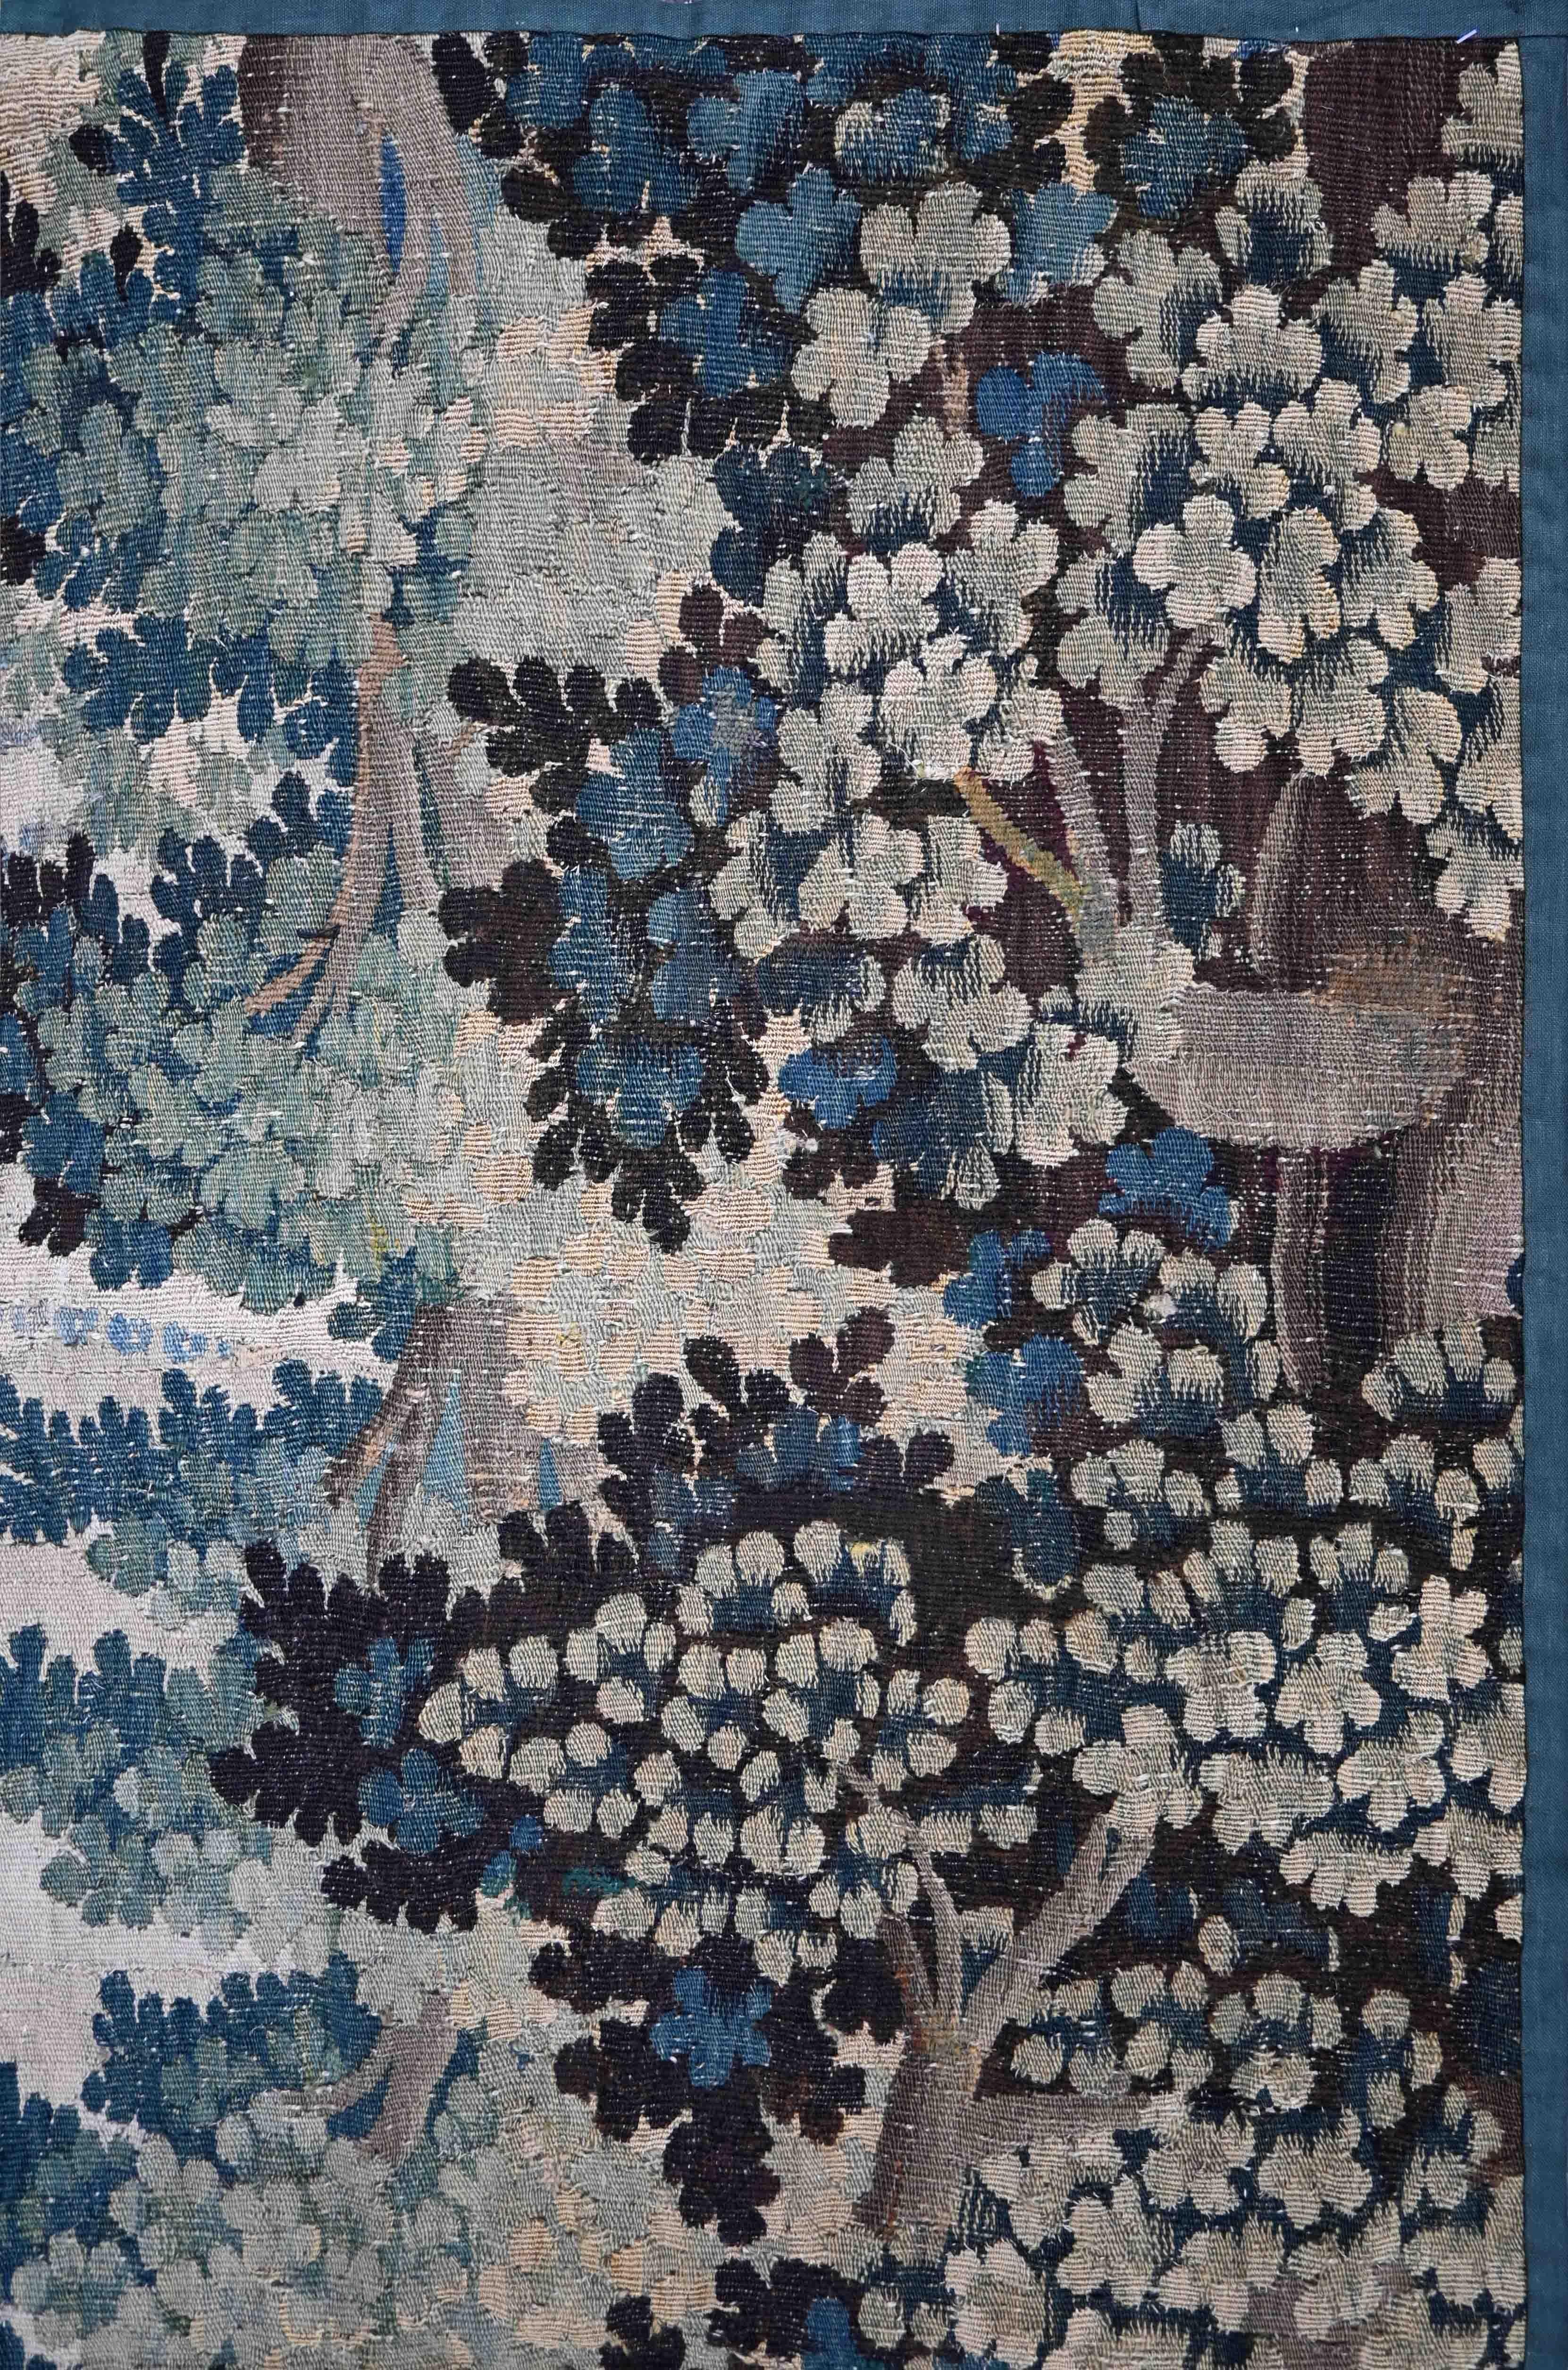 17th Century Tapestry Flanders (Audenarde ) - N° 1255

Close to the Eiffel Tower, We are a family business specialized in the purchase, sale and expertise of
tapestries, carpets, kilims and textiles old, modern and contemporary.
We work for private